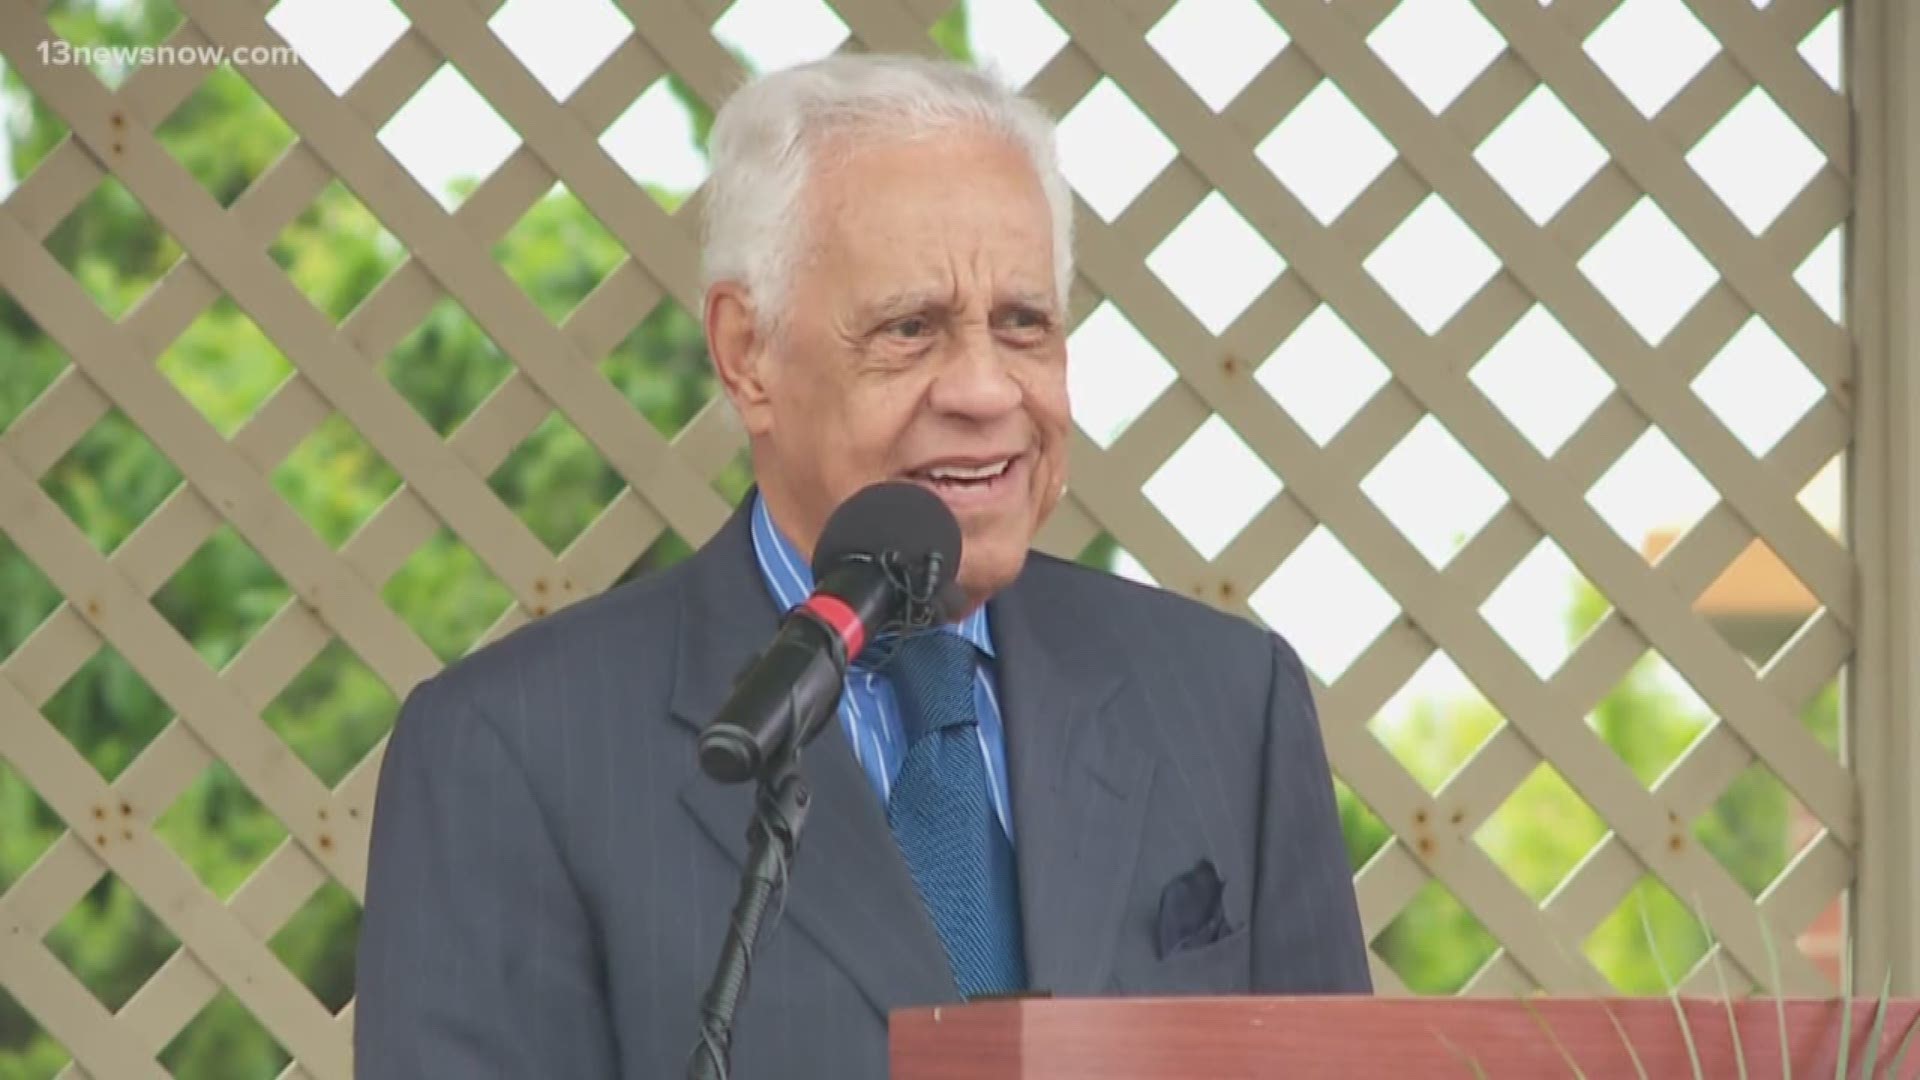 Former Virginia Governor Douglas Wilder kissed a Virginia Commonwealth Student without her consent. An investigation revealed his action, but it did clear him of three other alligations three other students made.